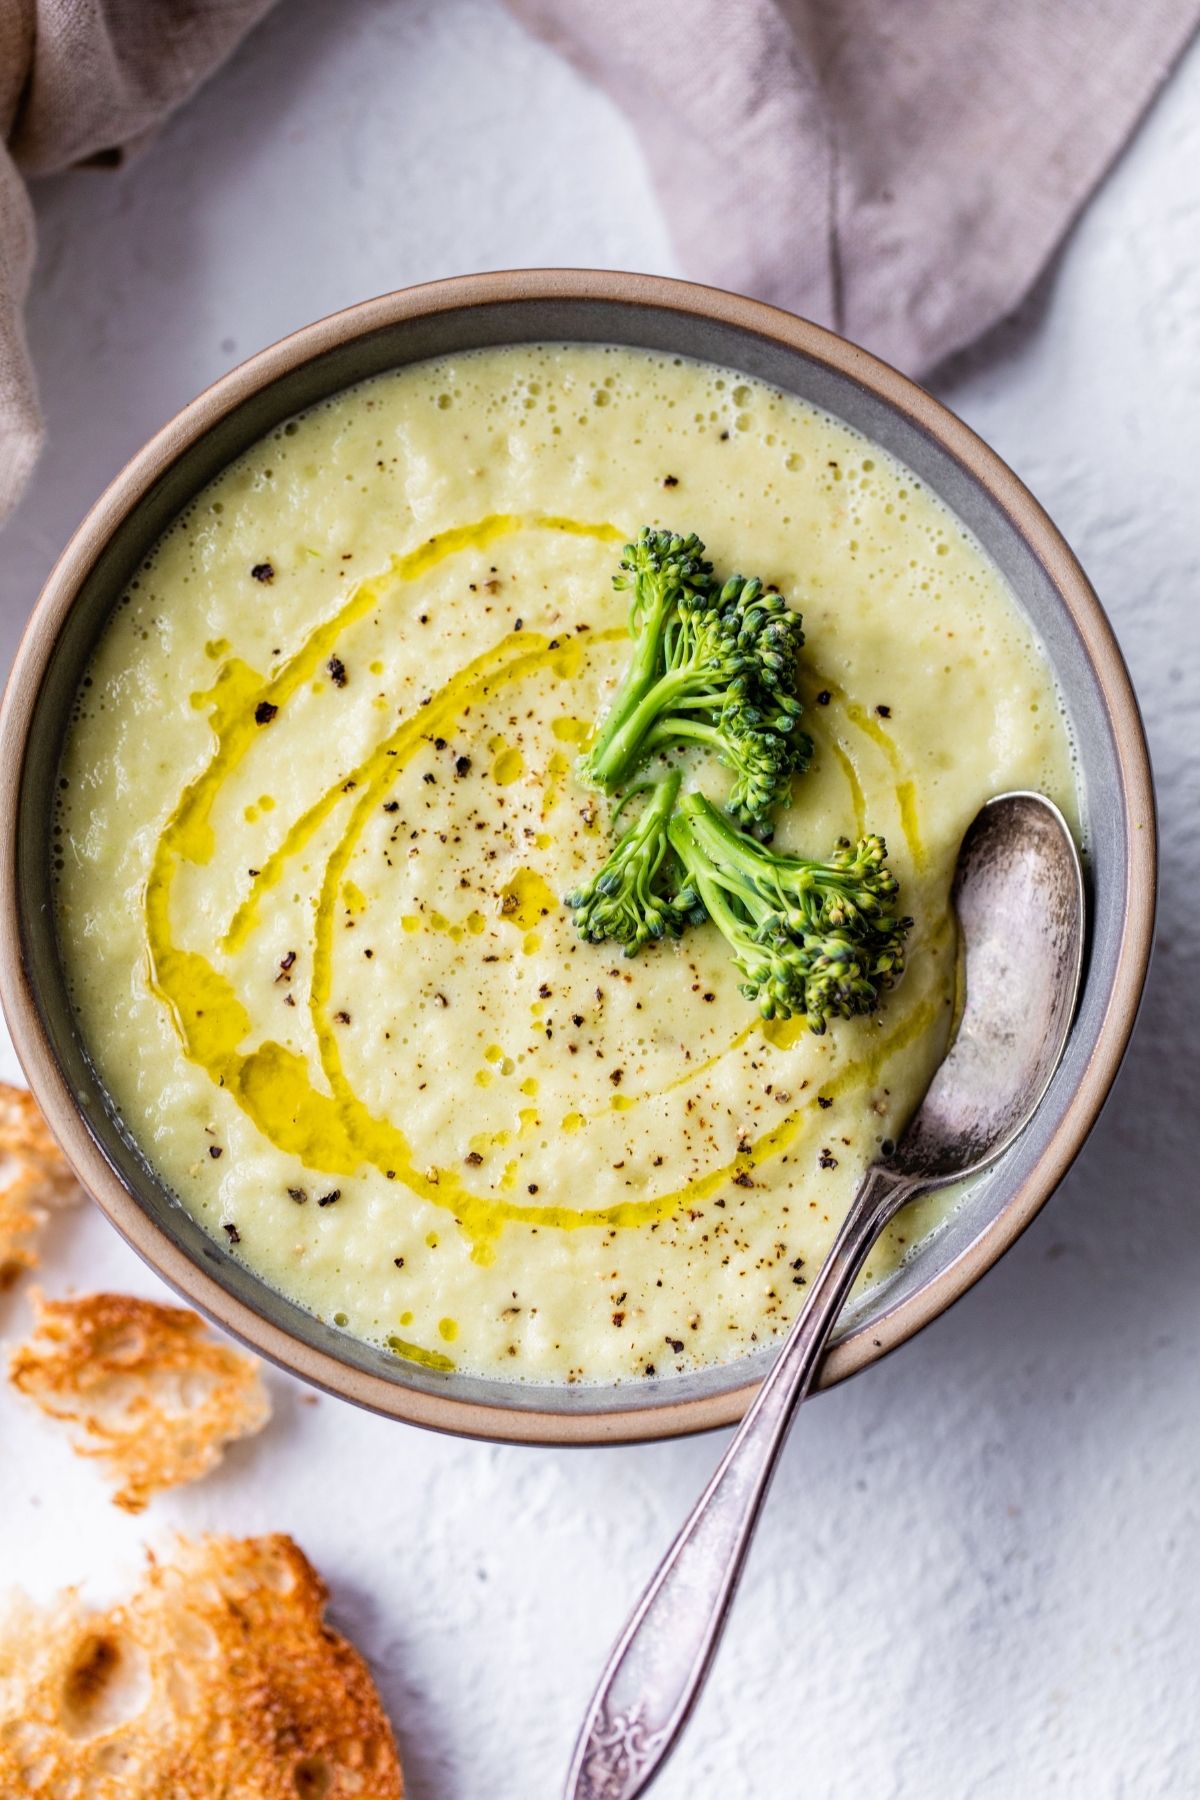 Broccoli stem soup in a bowl with a spoon.